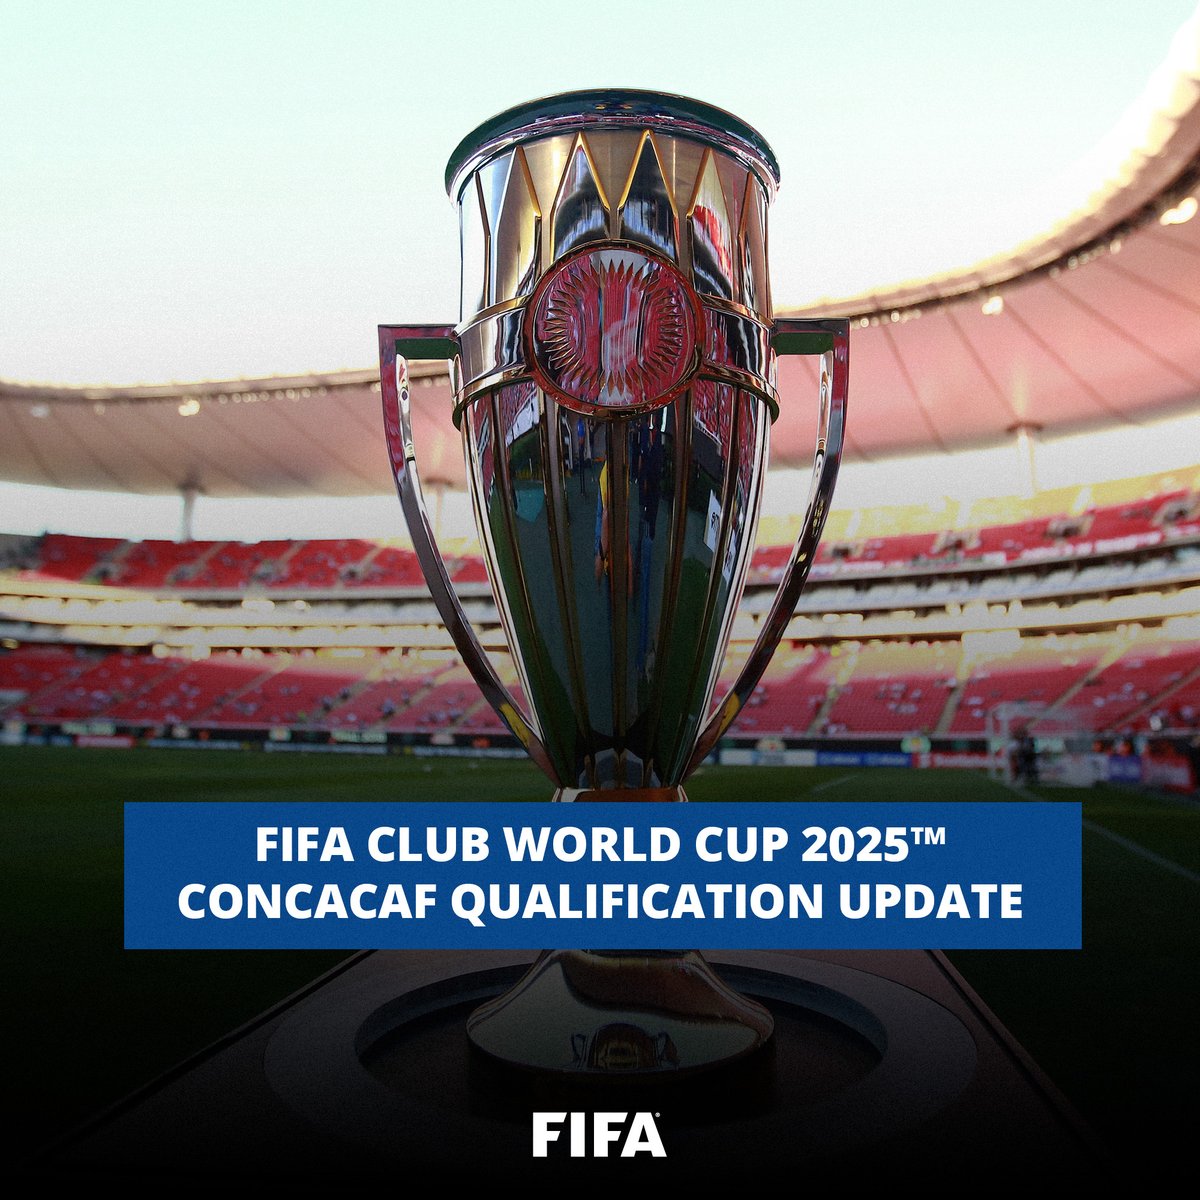 The fourth and final @Concacaf place at the FIFA Club World Cup 2025 is up for grabs and will go to the winners of the 2024 @TheChampions Cup, which is currently at the quarter-final (2nd leg) stage. Find out which teams remain in the hunt to qualify.